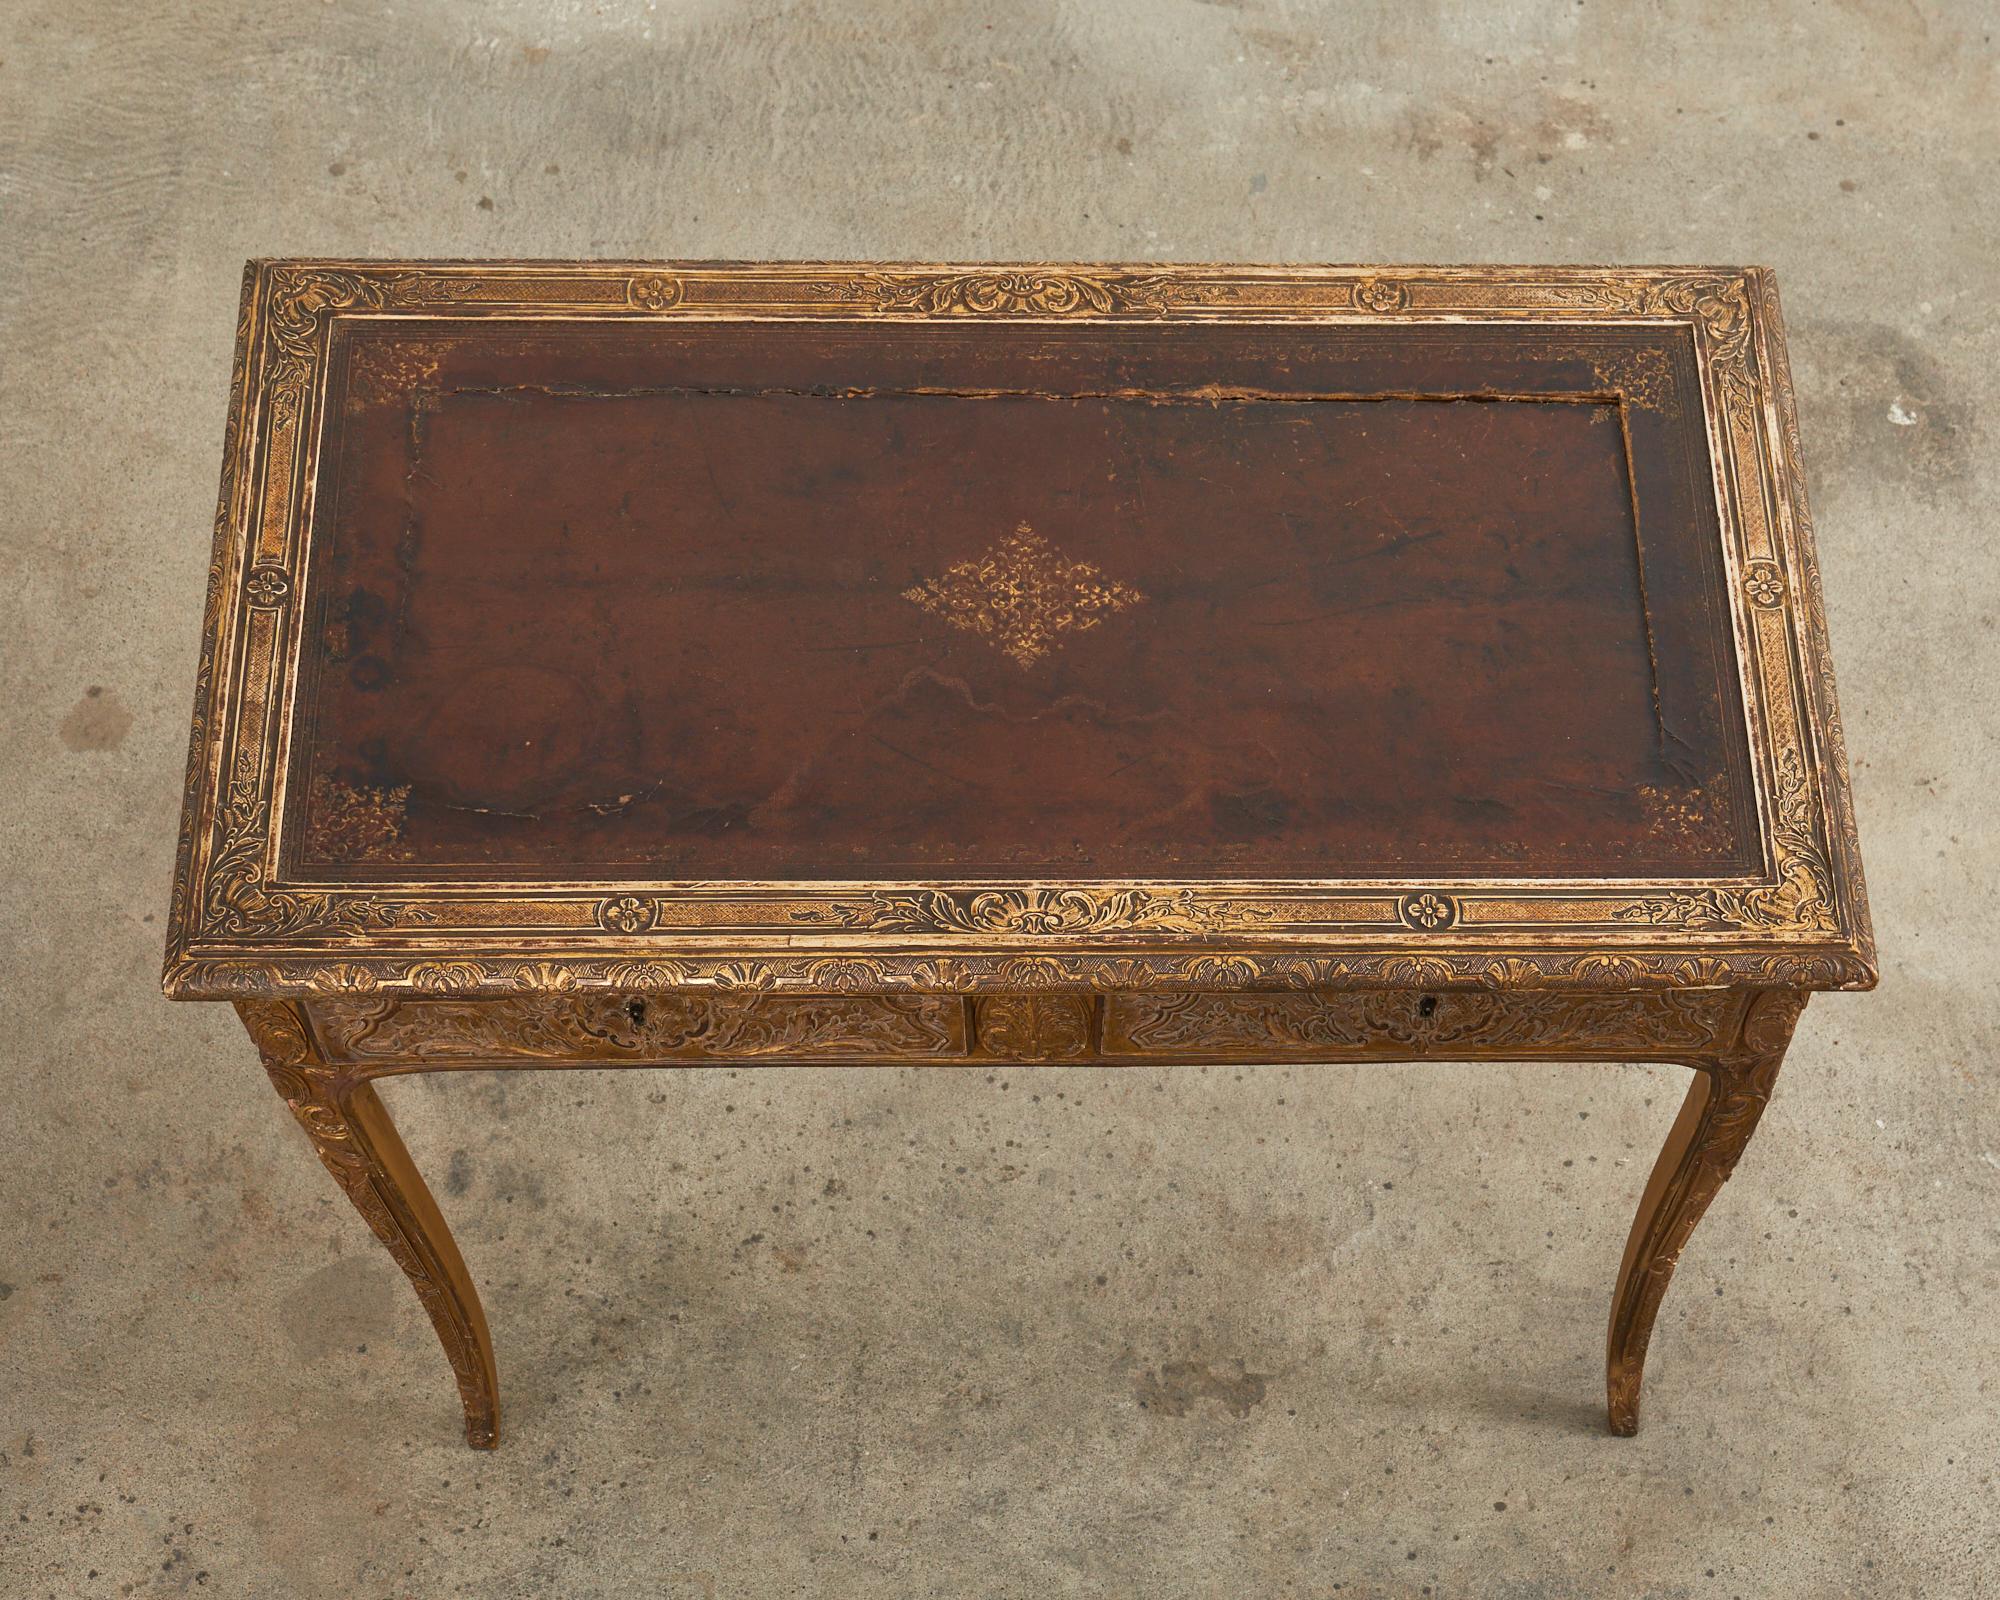 Gesso 19th Century Louis XV Style Gilt Carved Writing Table Desk For Sale